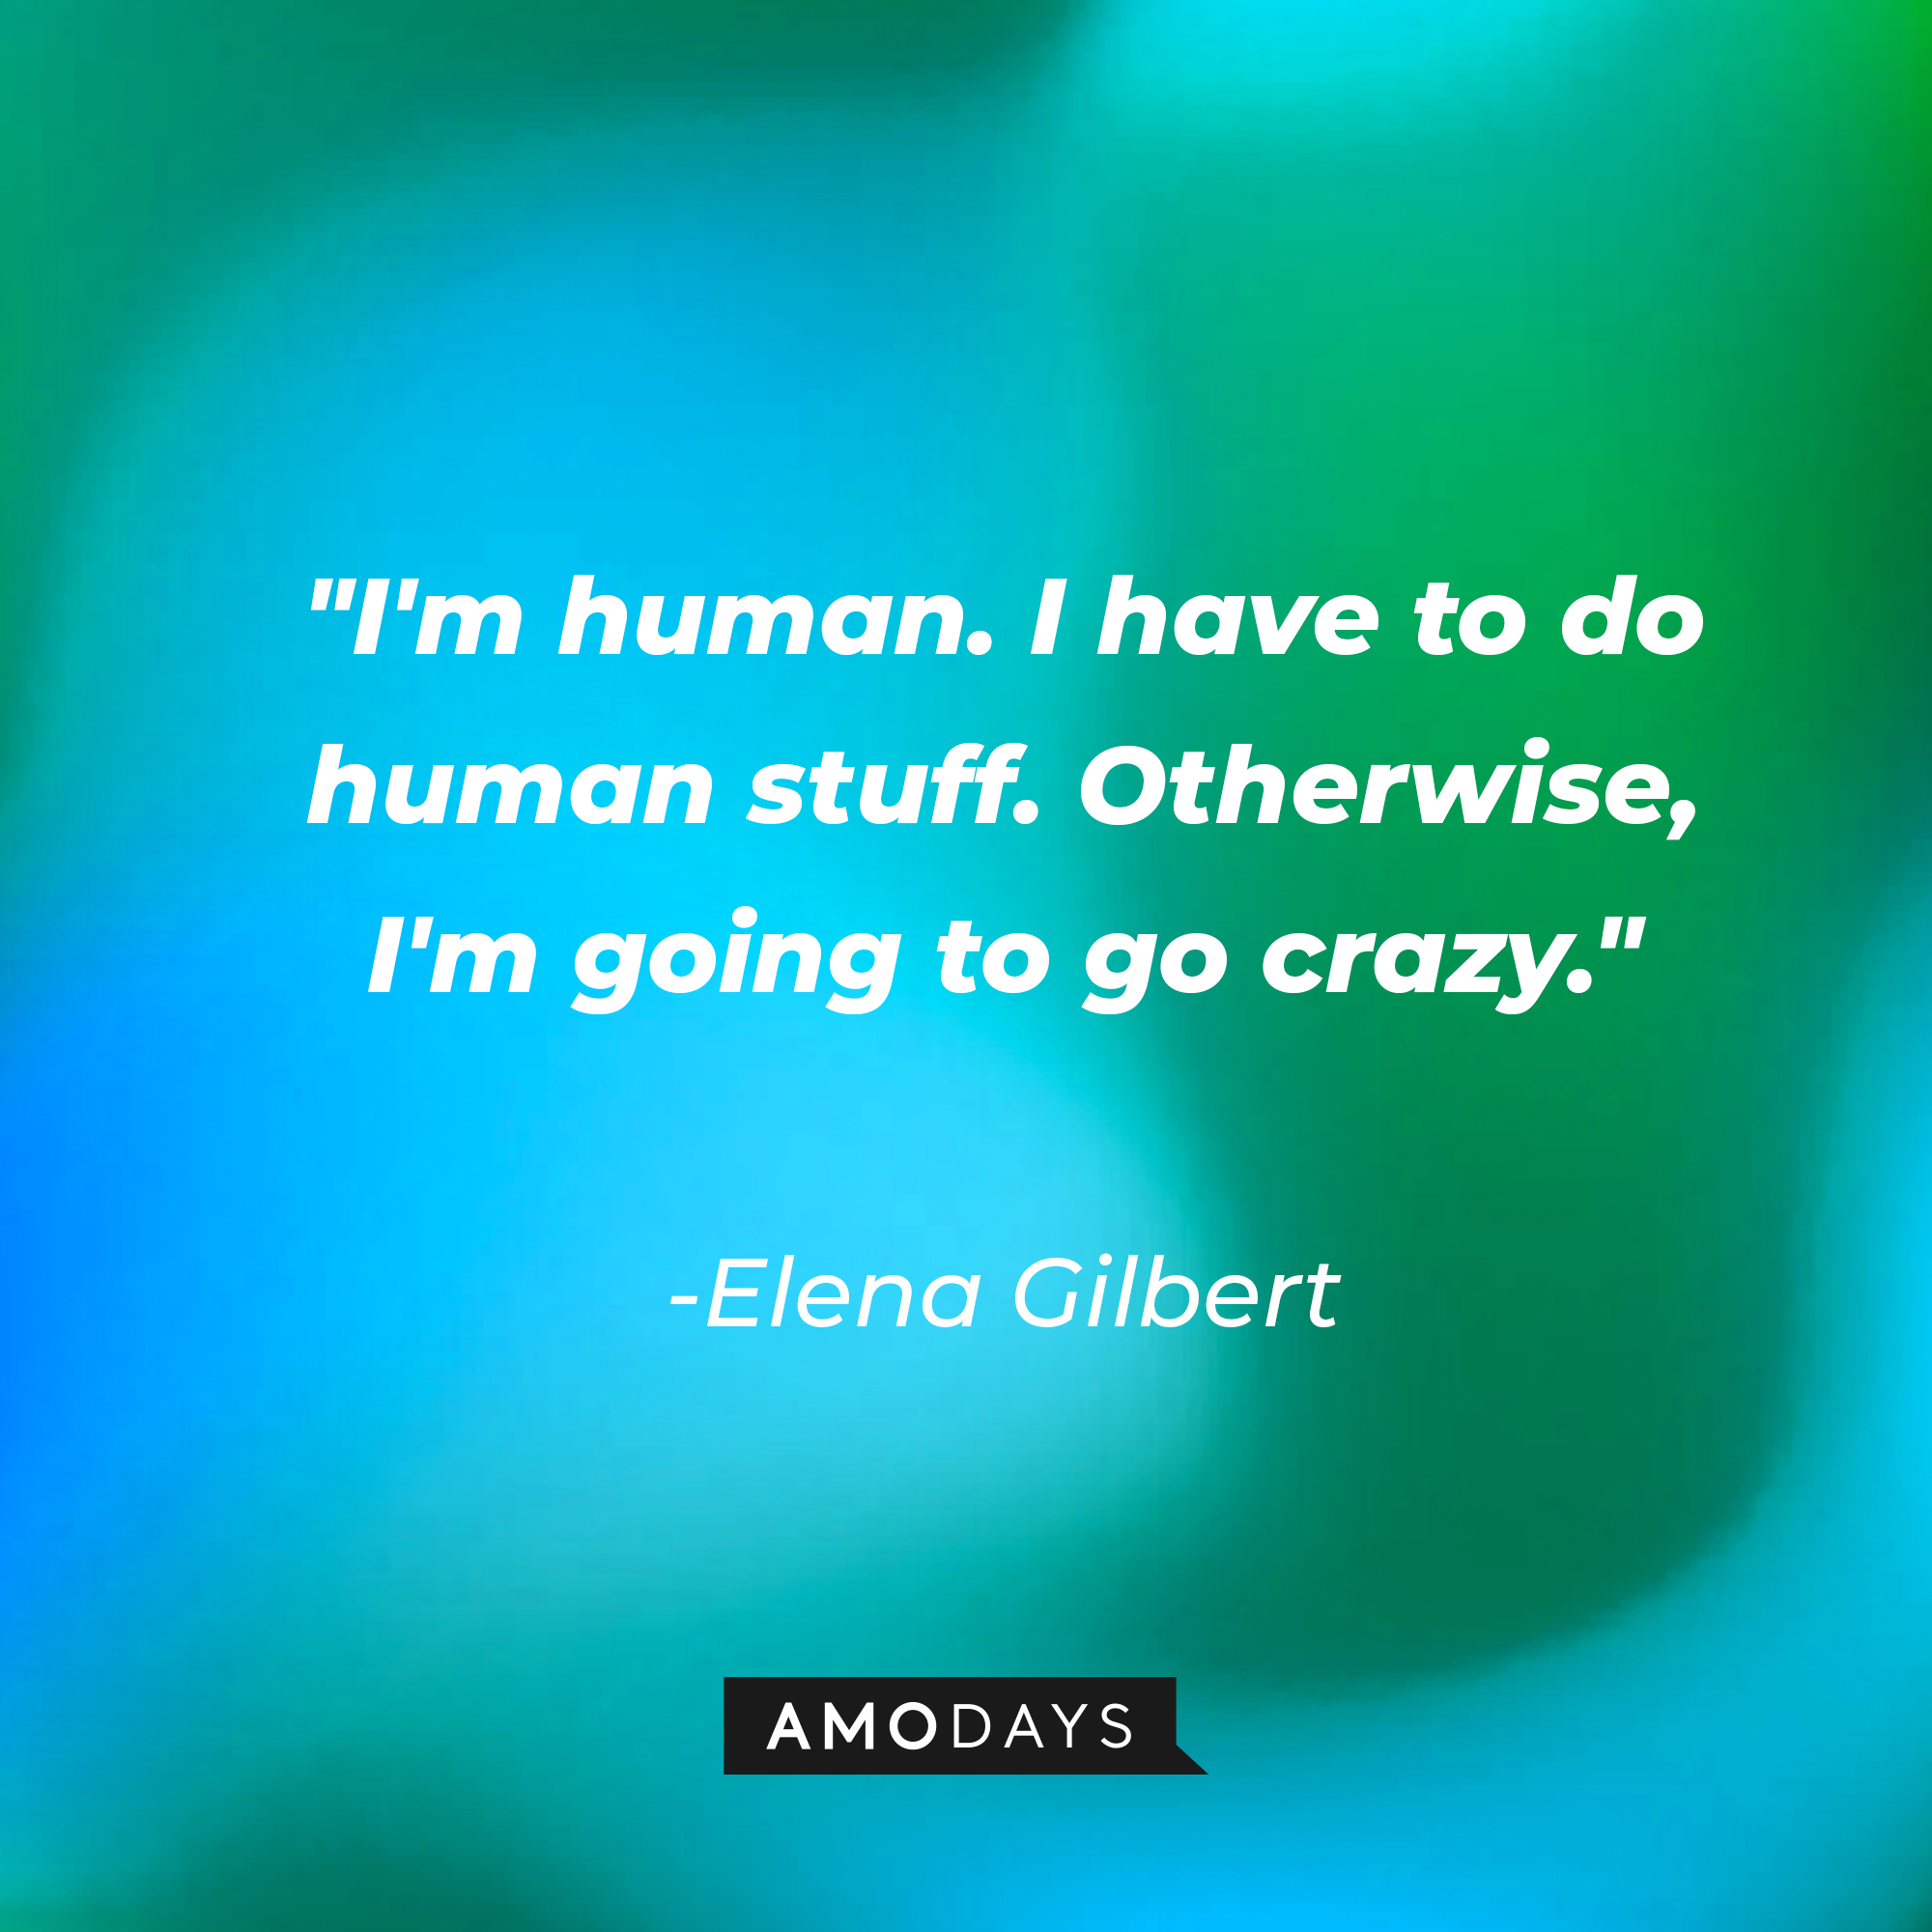 Elena Gilbert's quote: "I'm human. I have to do human stuff. Otherwise, I'm going to go crazy." | Image: AmoDays